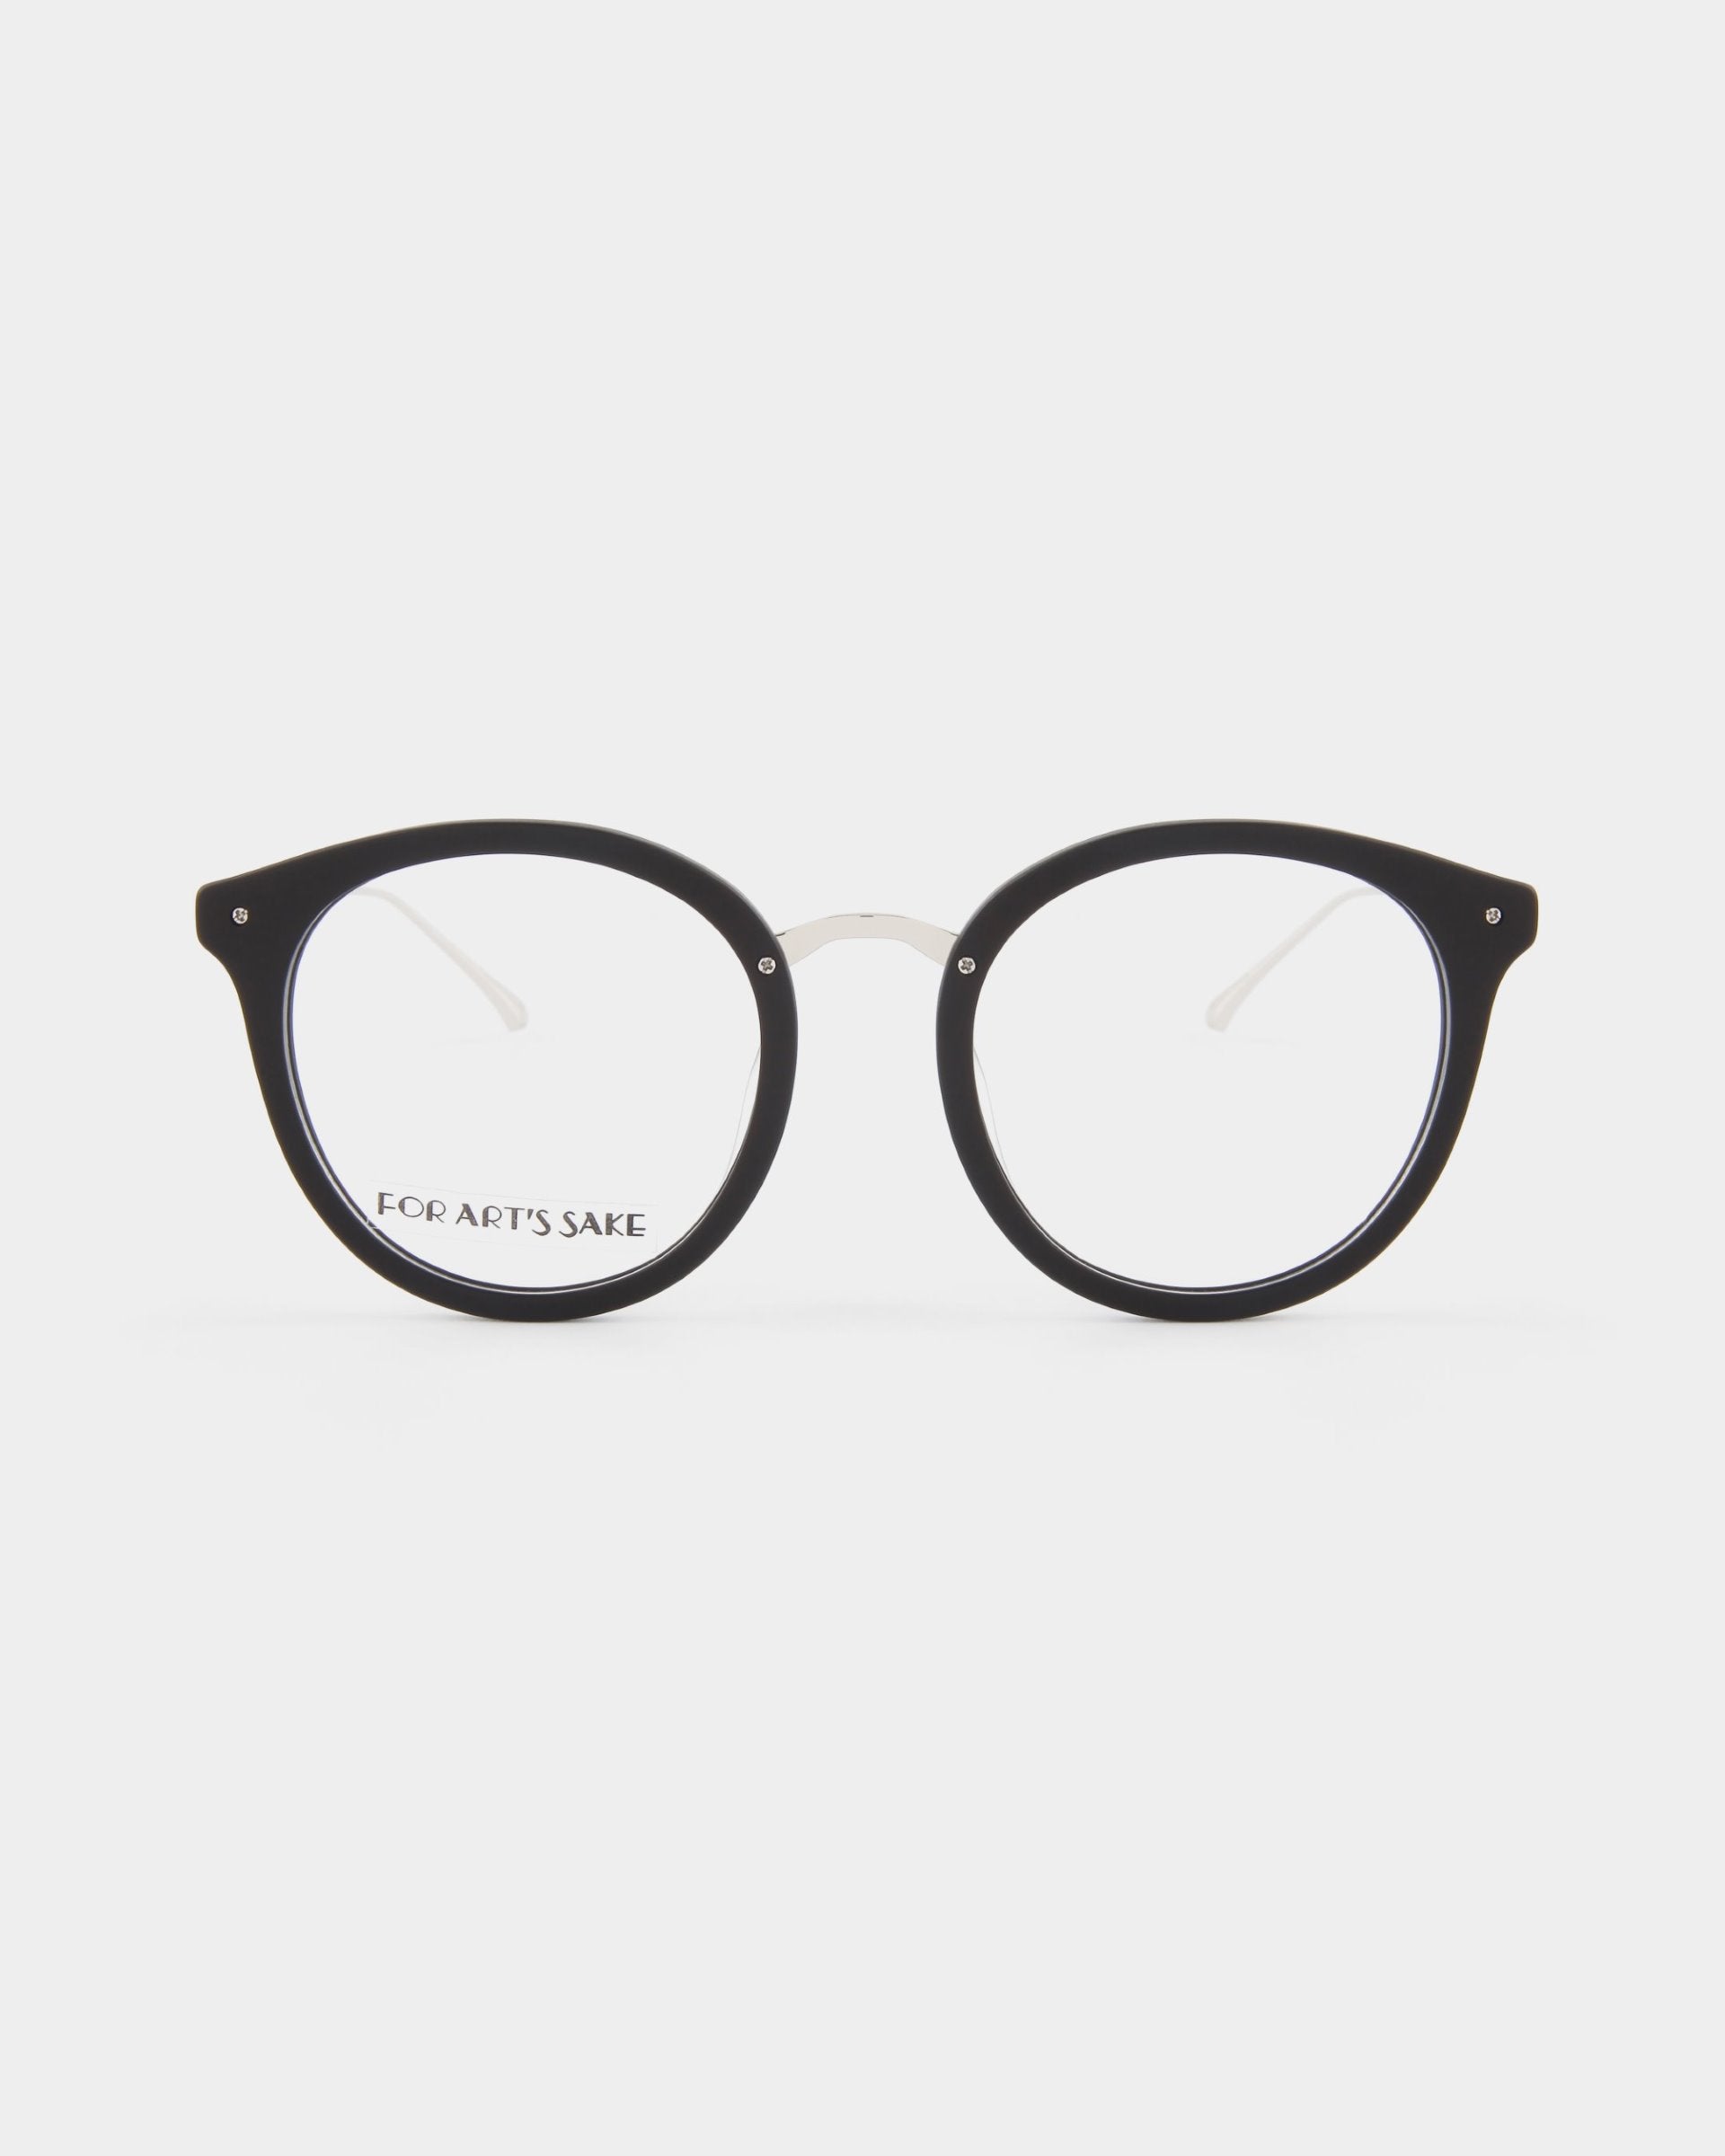 A pair of round, black-rimmed eyeglasses with clear lenses, displayed against a white background. The inside of the left temple arm is inscribed with &quot;FOR ARTS SAKE.&quot; The glasses feature UV protection lenses and have a classic and minimalistic design. These are the Jackie by For Art&#39;s Sake®.